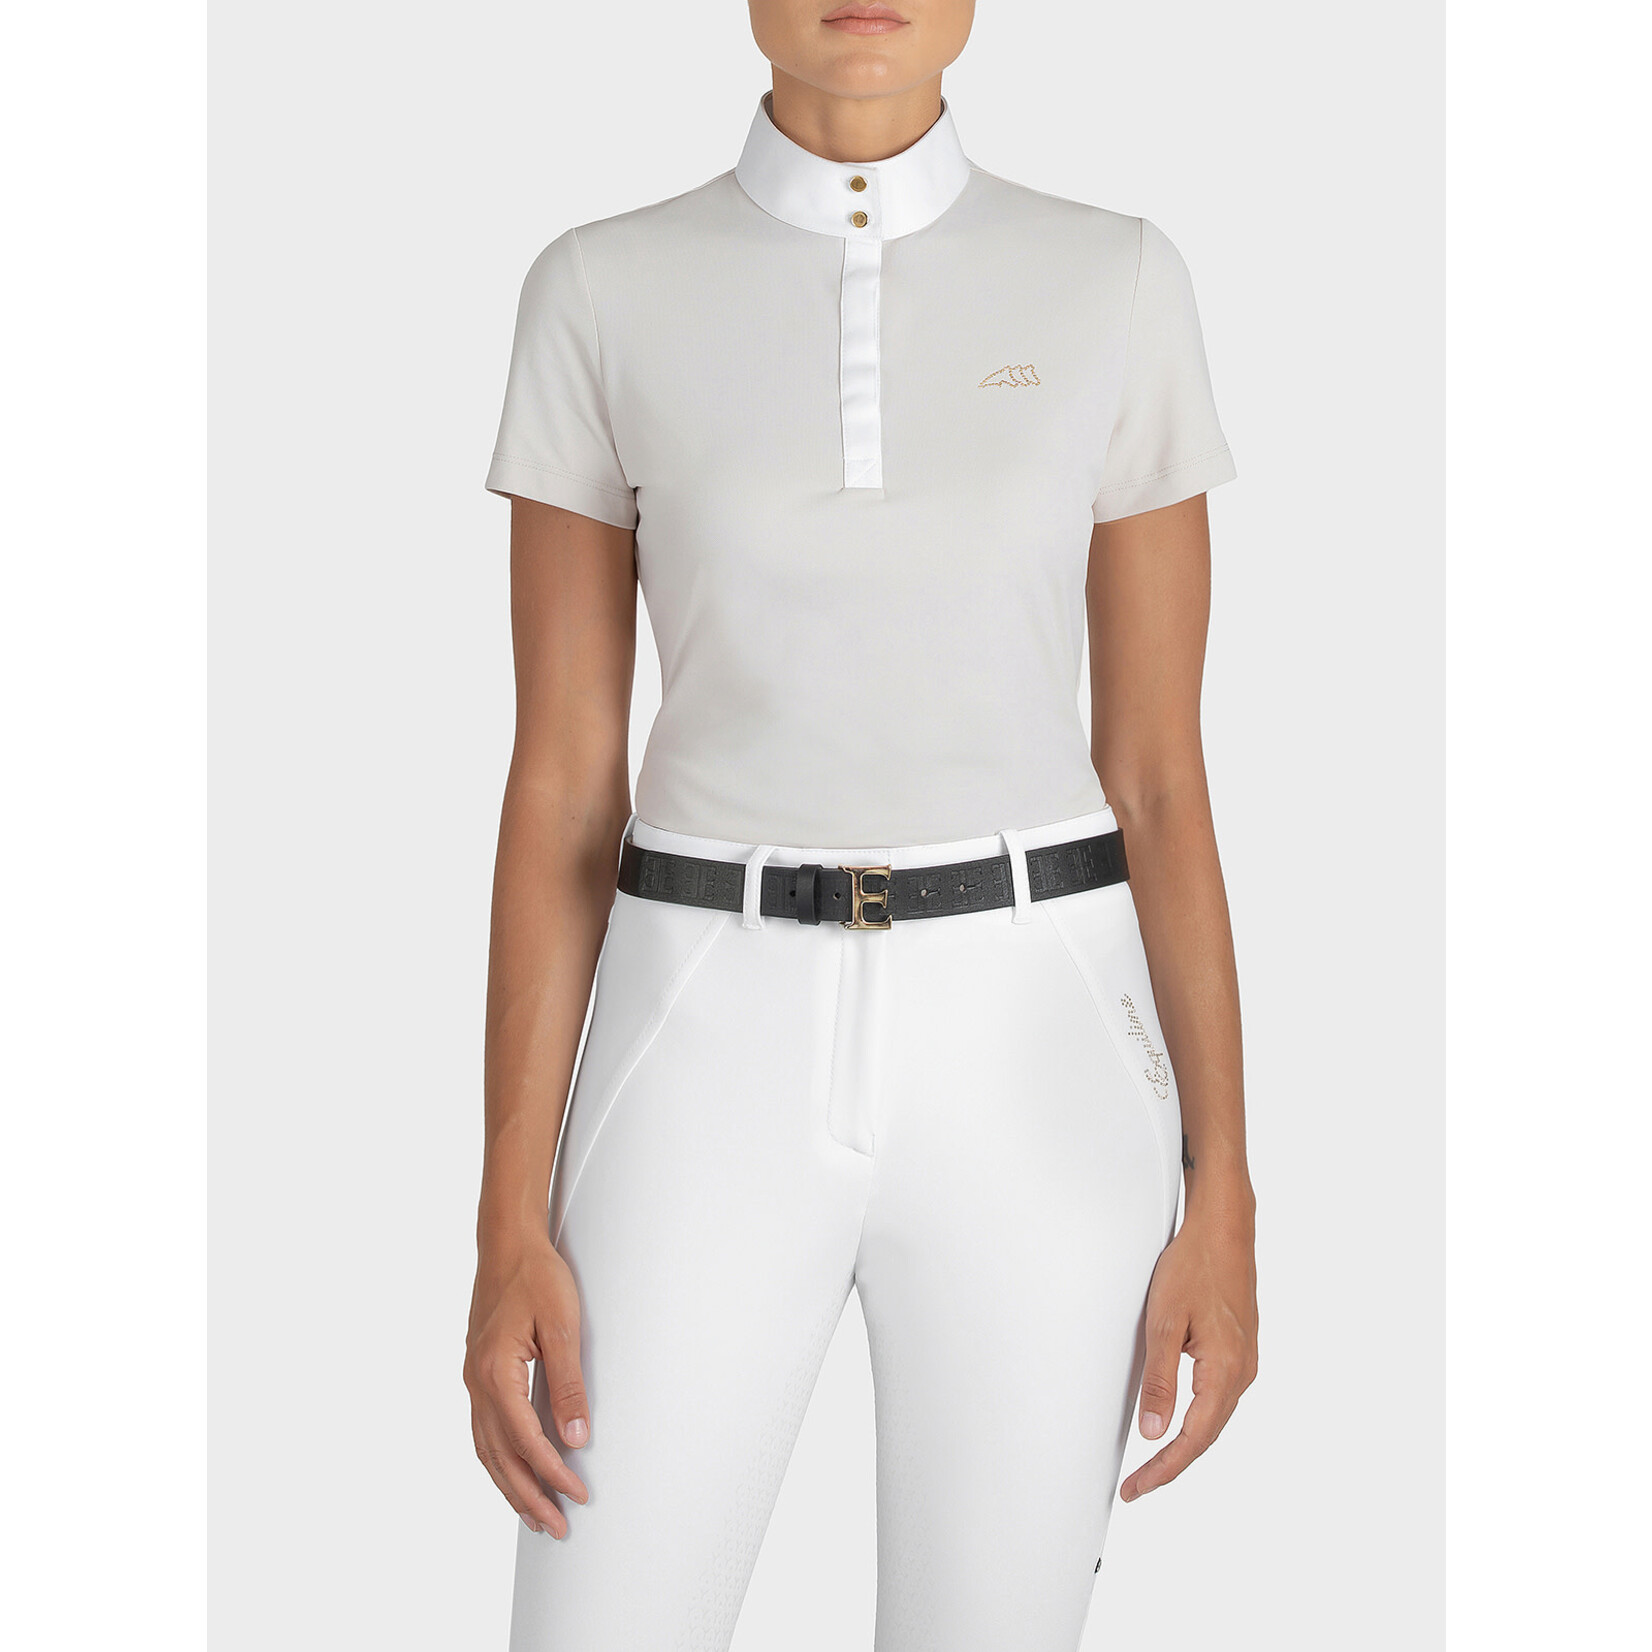 Equiline H00886 Equiline Elizzye S/S Women's Competition Polo Shirt